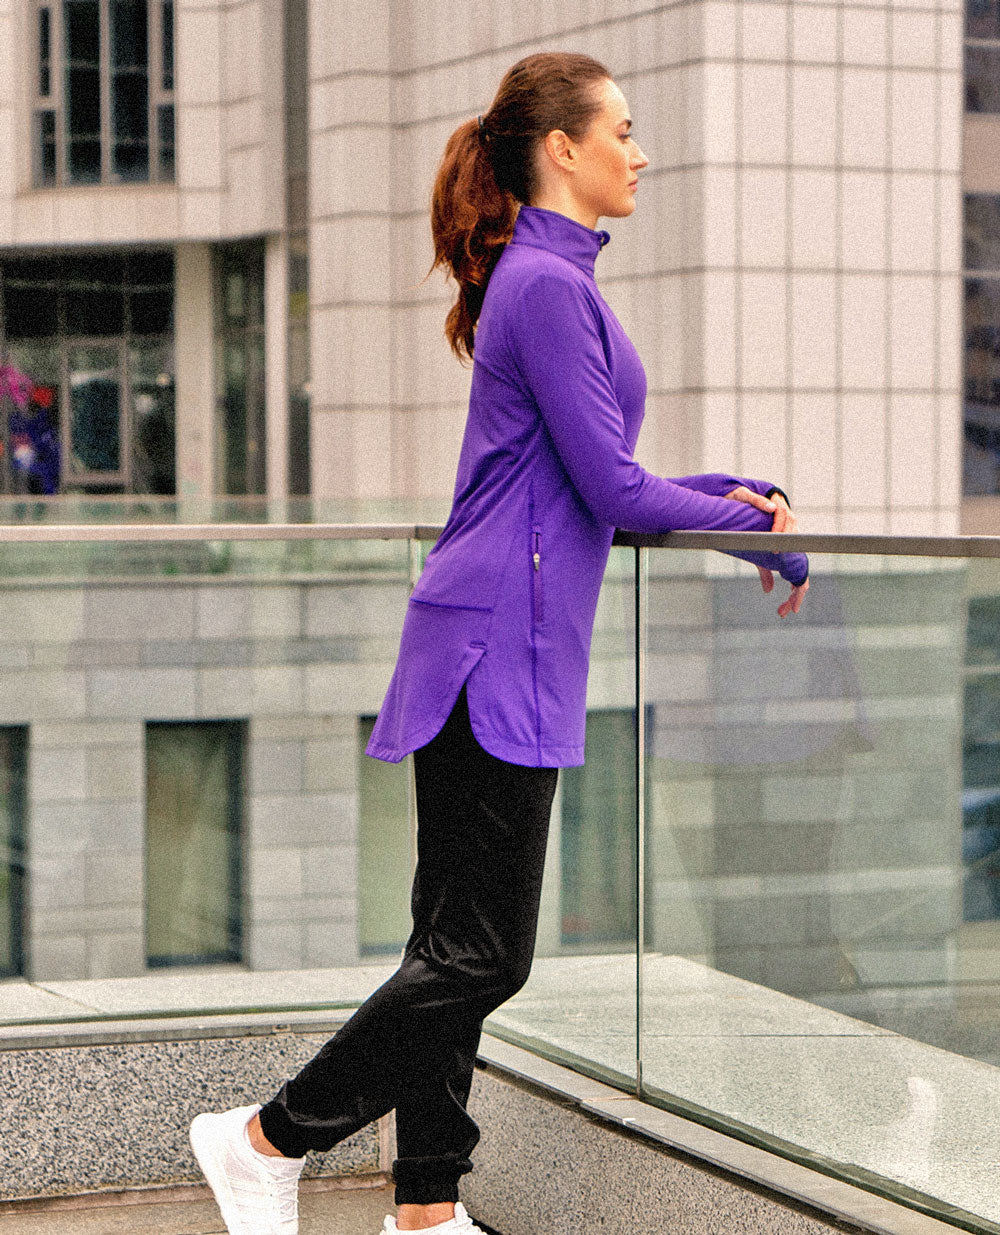 A female wearing a purple Spark Half-Zip, a Veil Garments modest activewear product, in an outdoor setting.